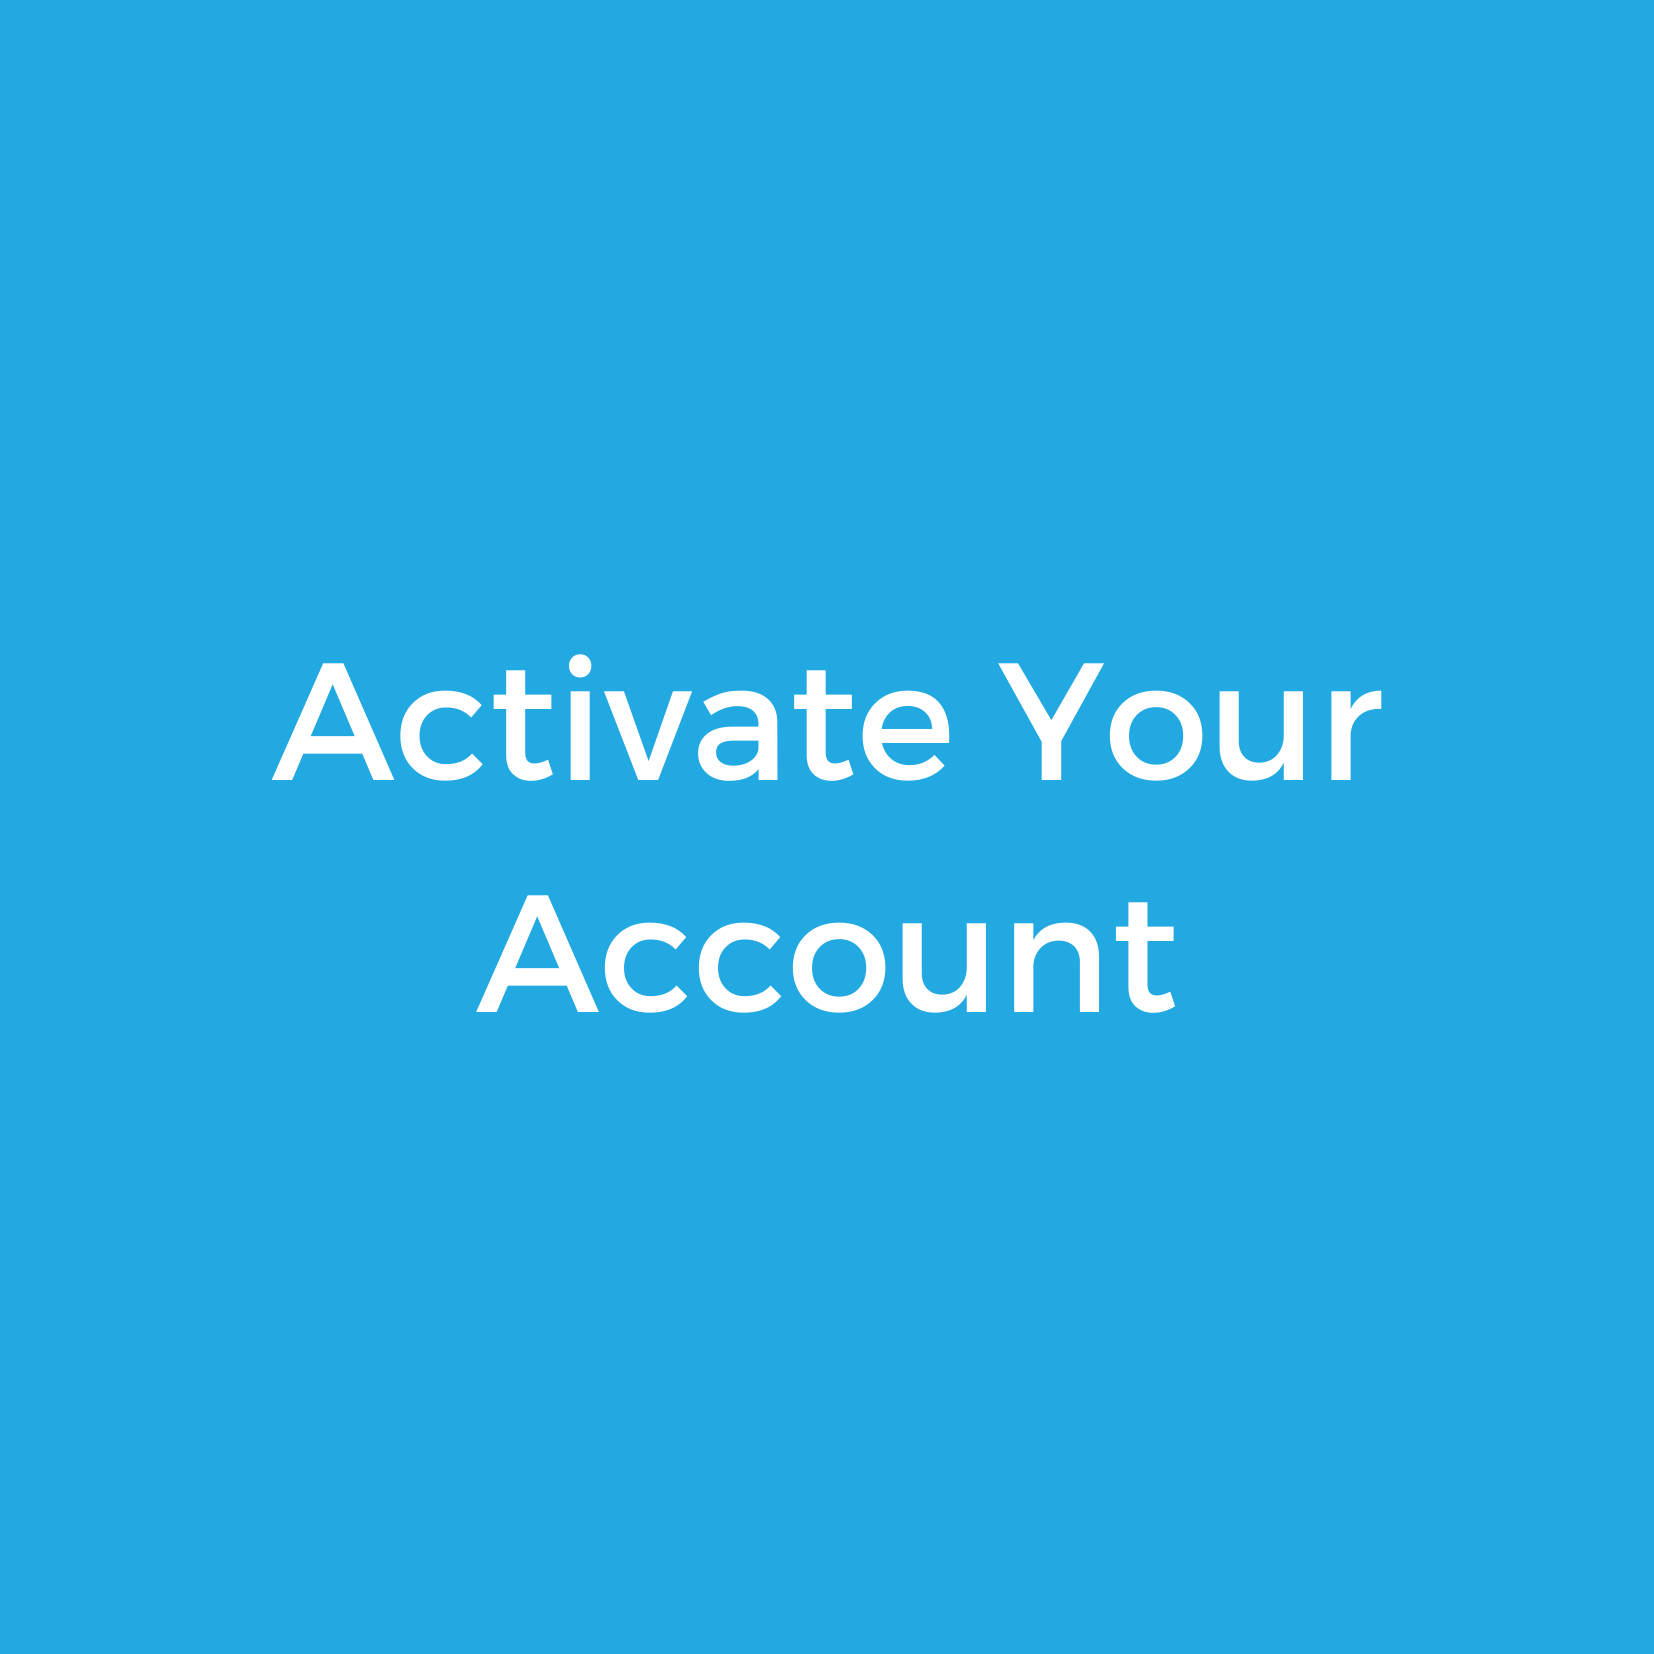 Activate Your Account